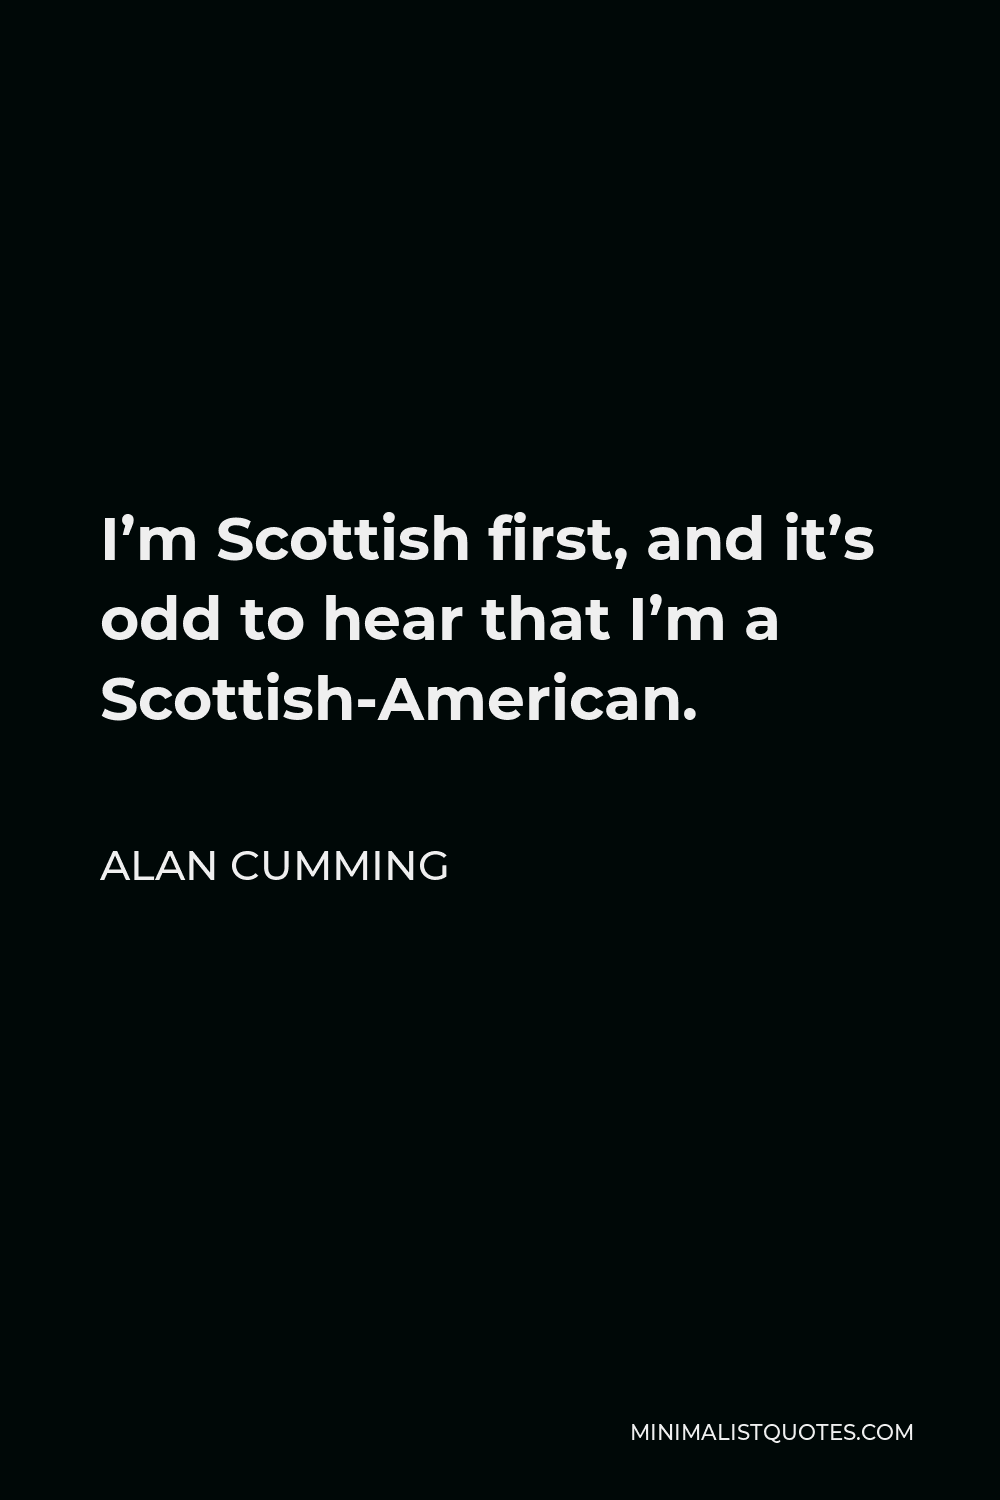 Alan Cumming Quote - I’m Scottish first, and it’s odd to hear that I’m a Scottish-American.